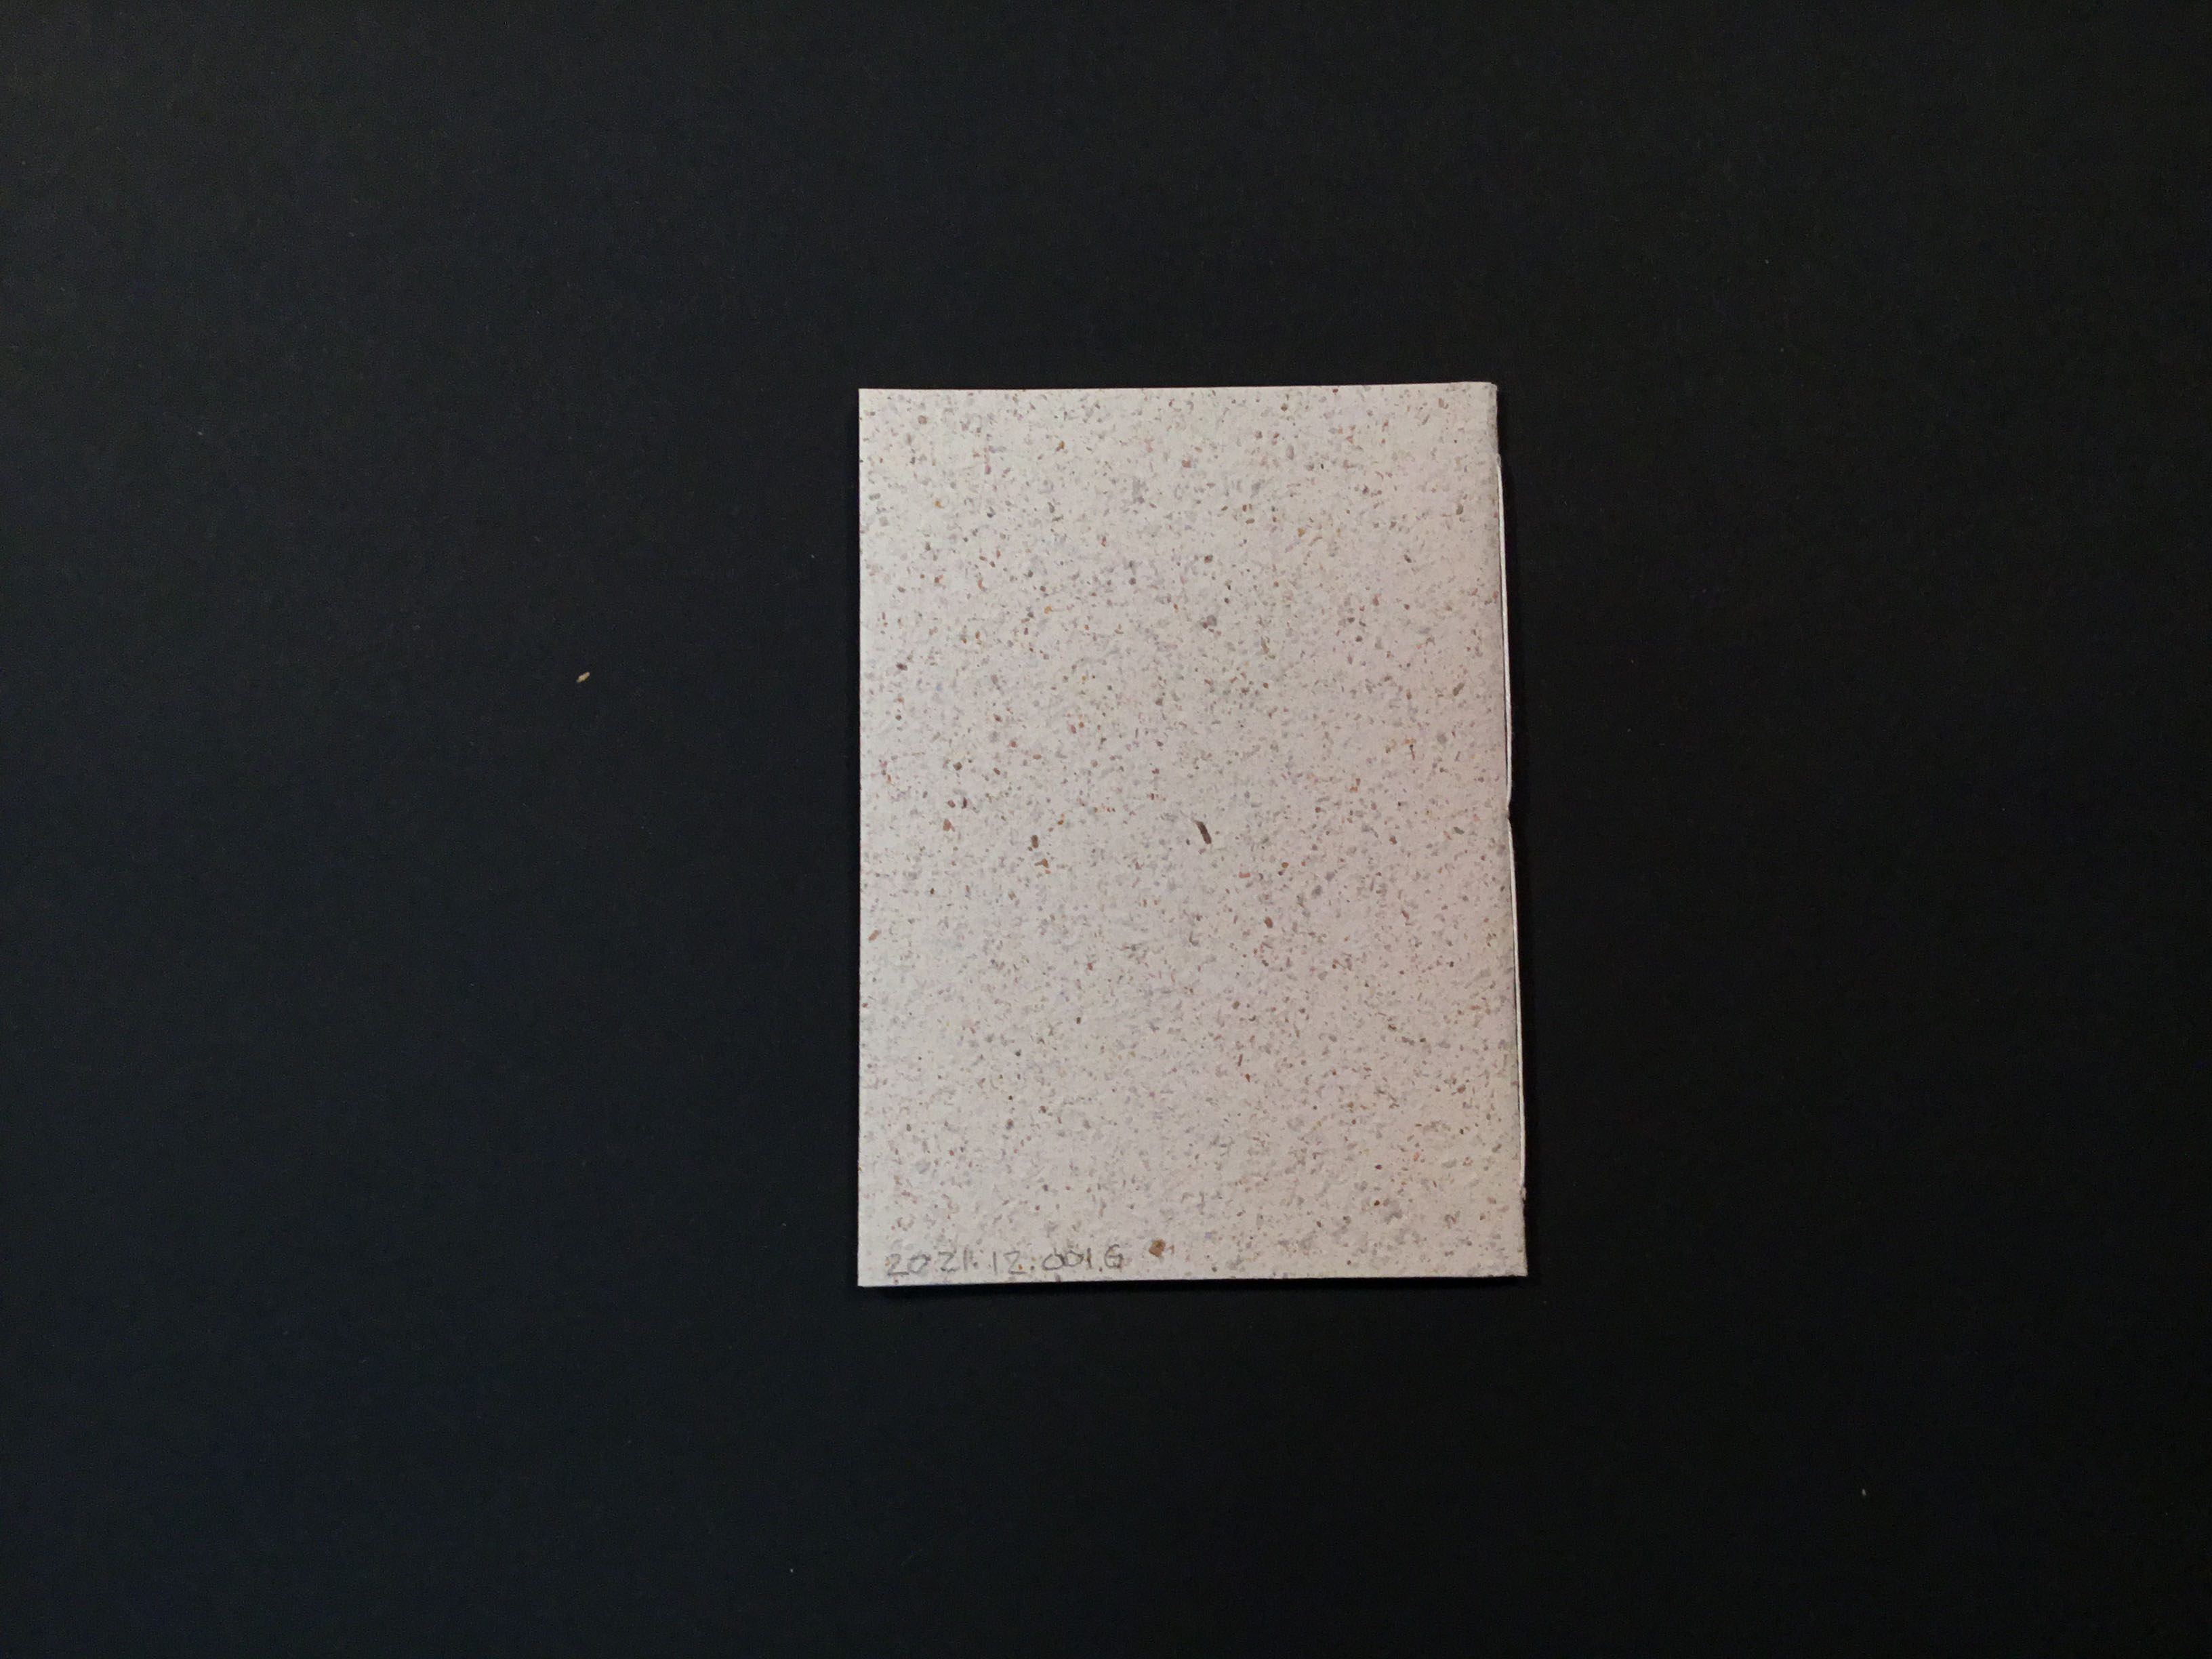 A journal with beige covers made of recycled paper and blue oyster mycelium scattered throughout, resembling a sedimentary rock. The cover has a root inclusion in the center, and the interior pages are off-white and are made from Alabama kozo and recycled paper with chanterelle mushroom spores.